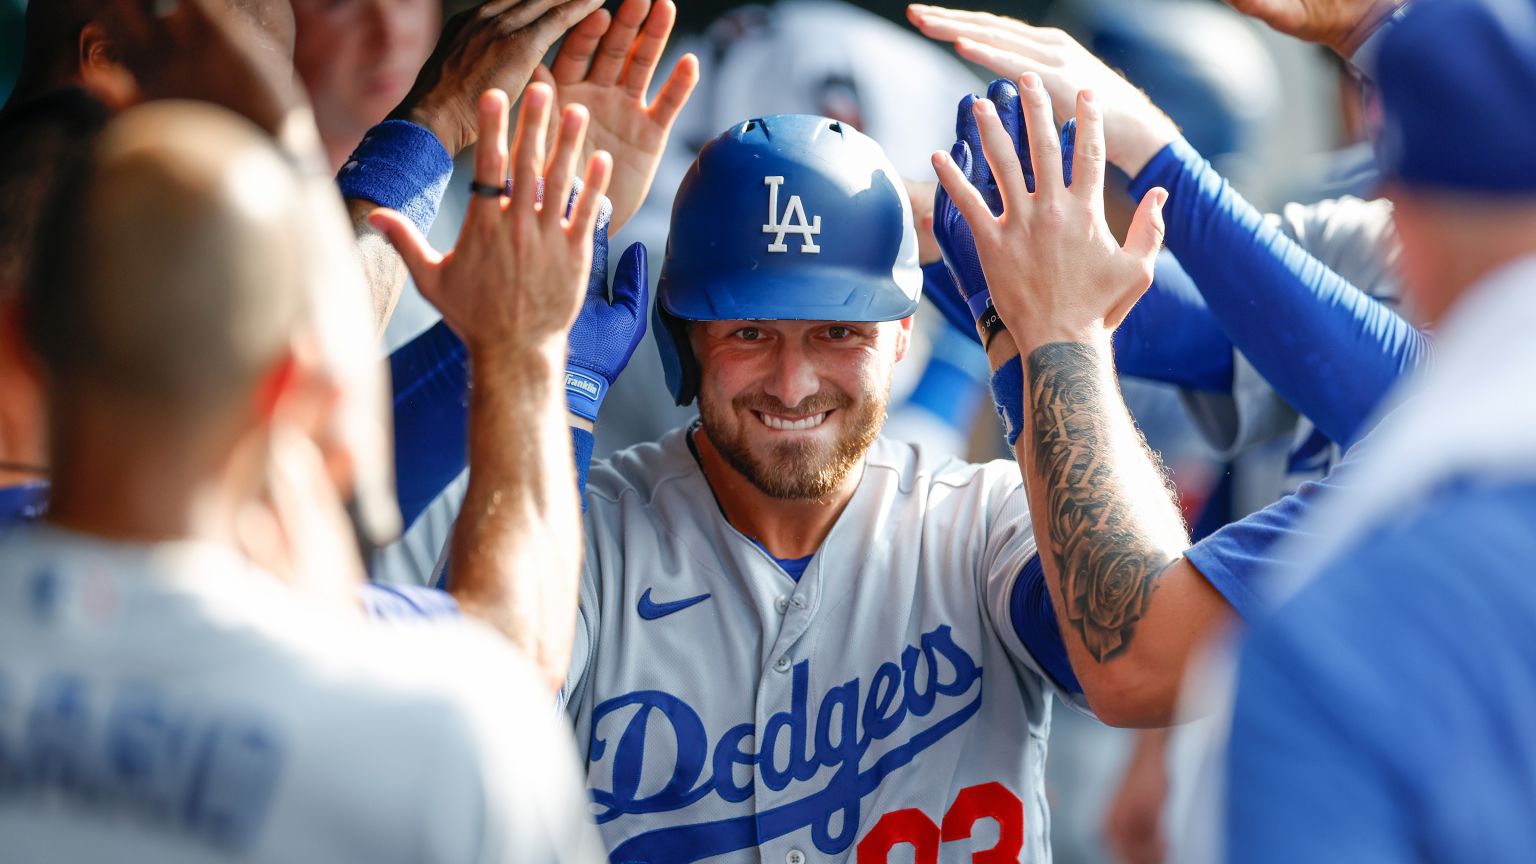 Los Angeles Dodgers - Welcome back, Chase! Today, the Dodgers